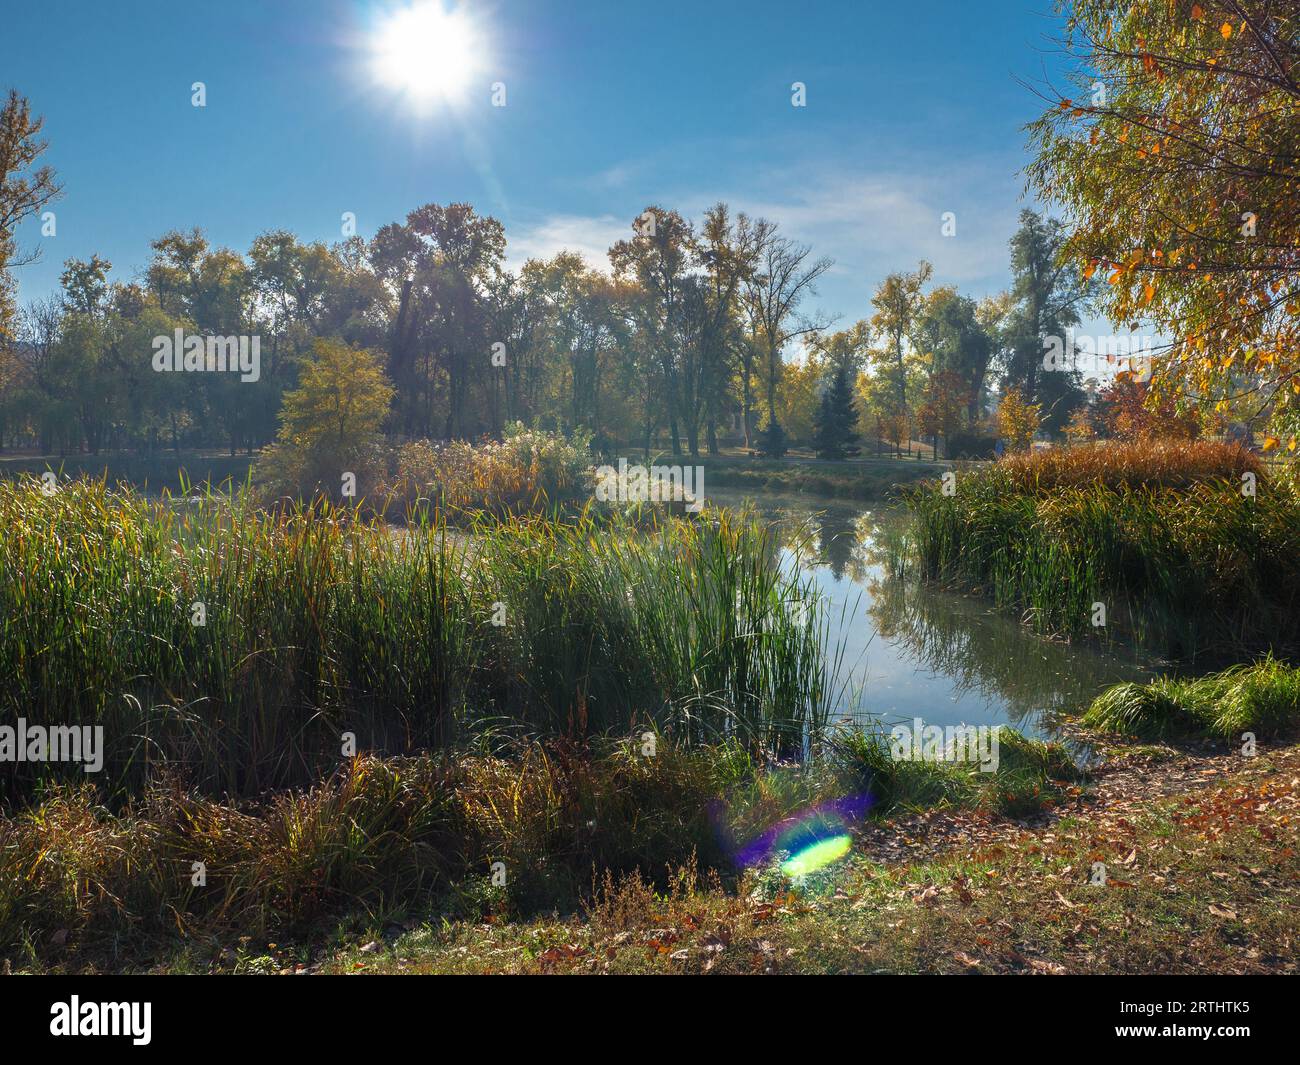 White bright sun galo shining above the city park with lake and bulrush and trees around. Rainbow above the water. Stock Photo